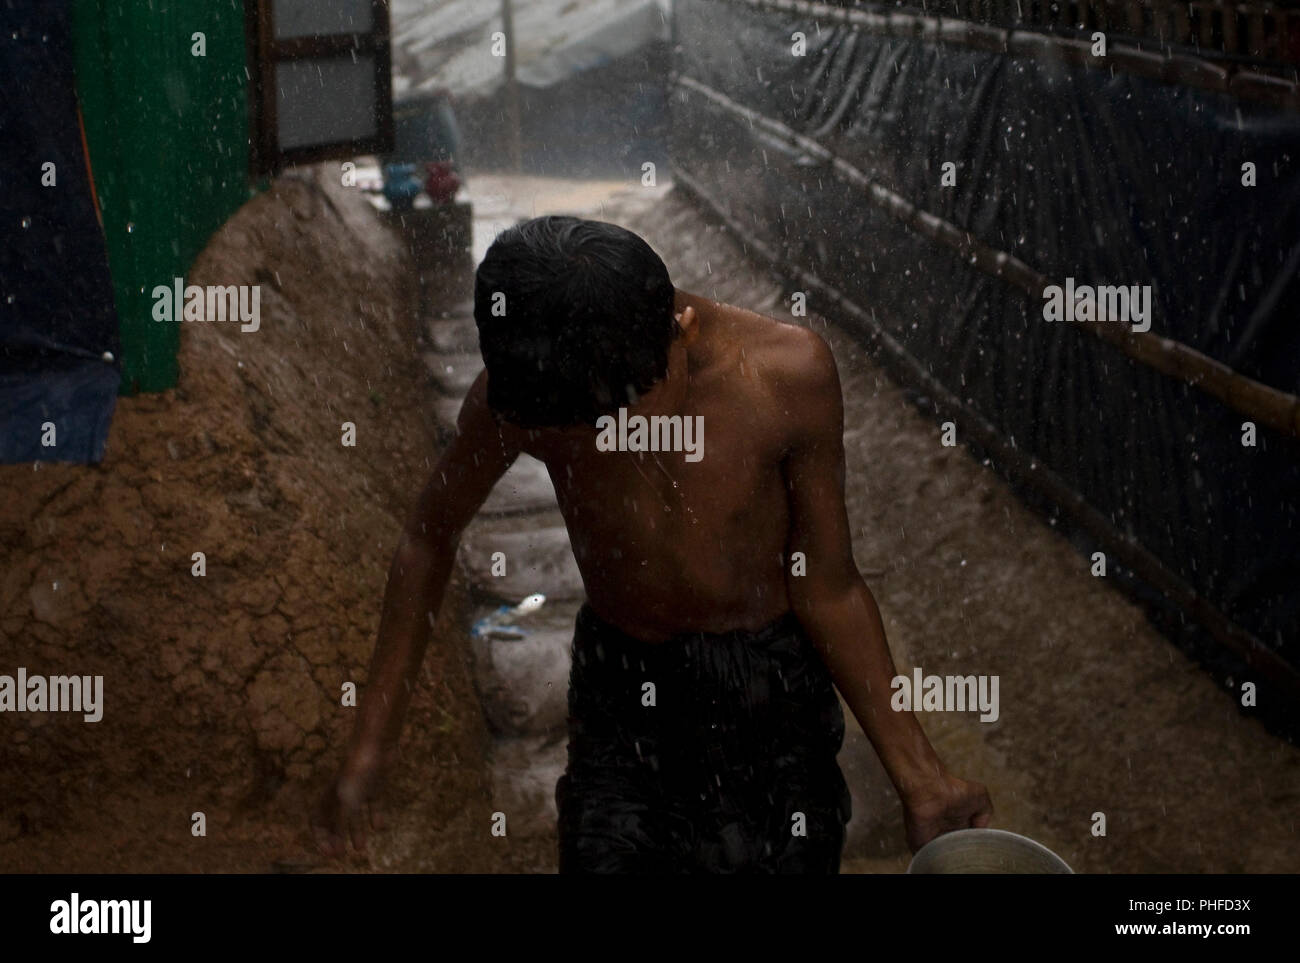 A boy collects water during heavy rain in Chakmakul, one of the camps sheltering over 800,000 Rohingya refugees, Cox's Bazar, Bangladesh, July 4, 2018 Stock Photo